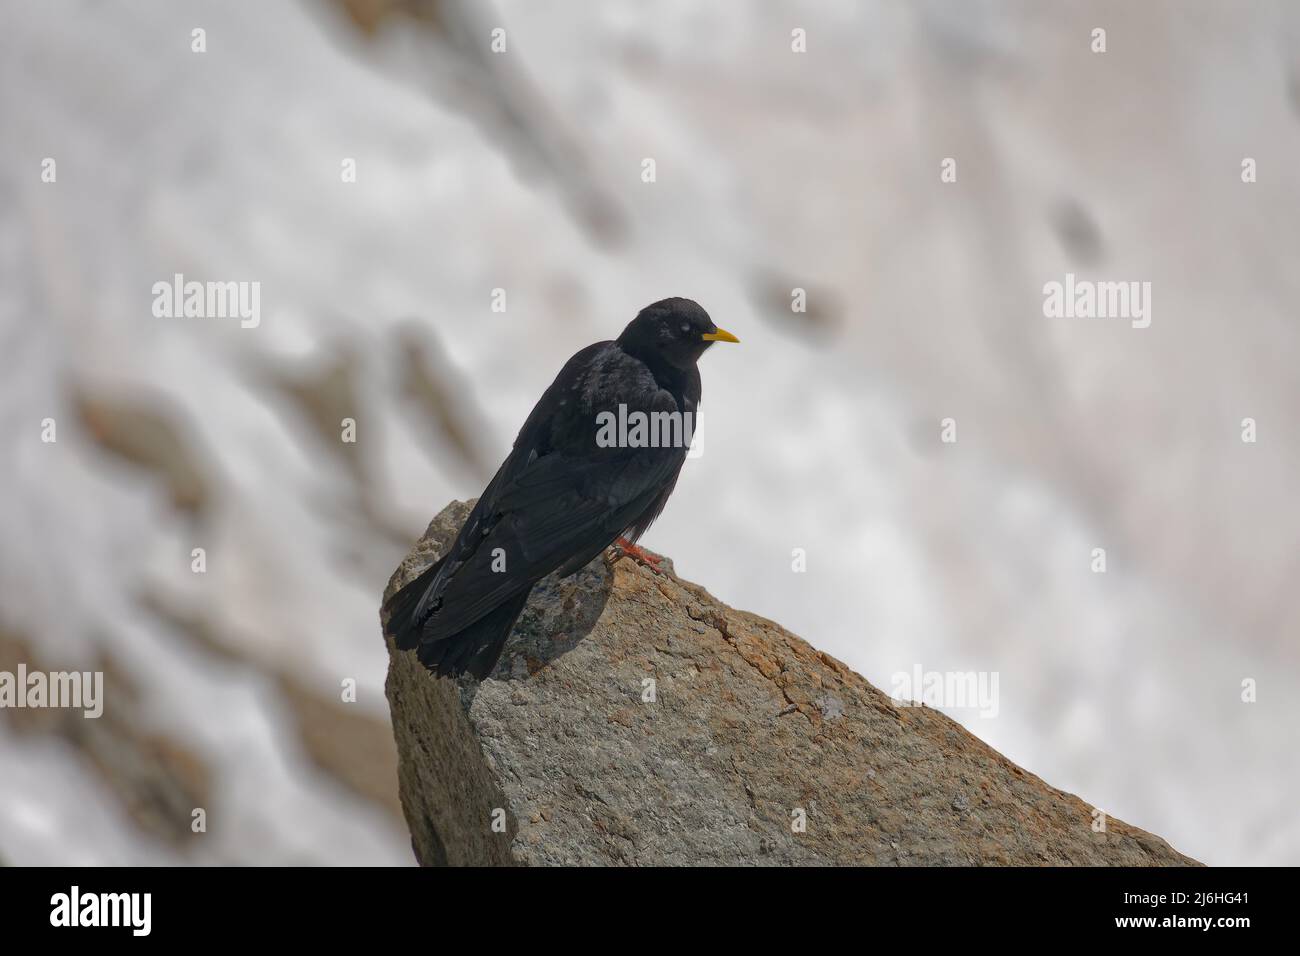 The Alpine Chough, or yellow-billed chough, (Pyrrhocorax graculus) is a bird in the crow family. Stock Photo